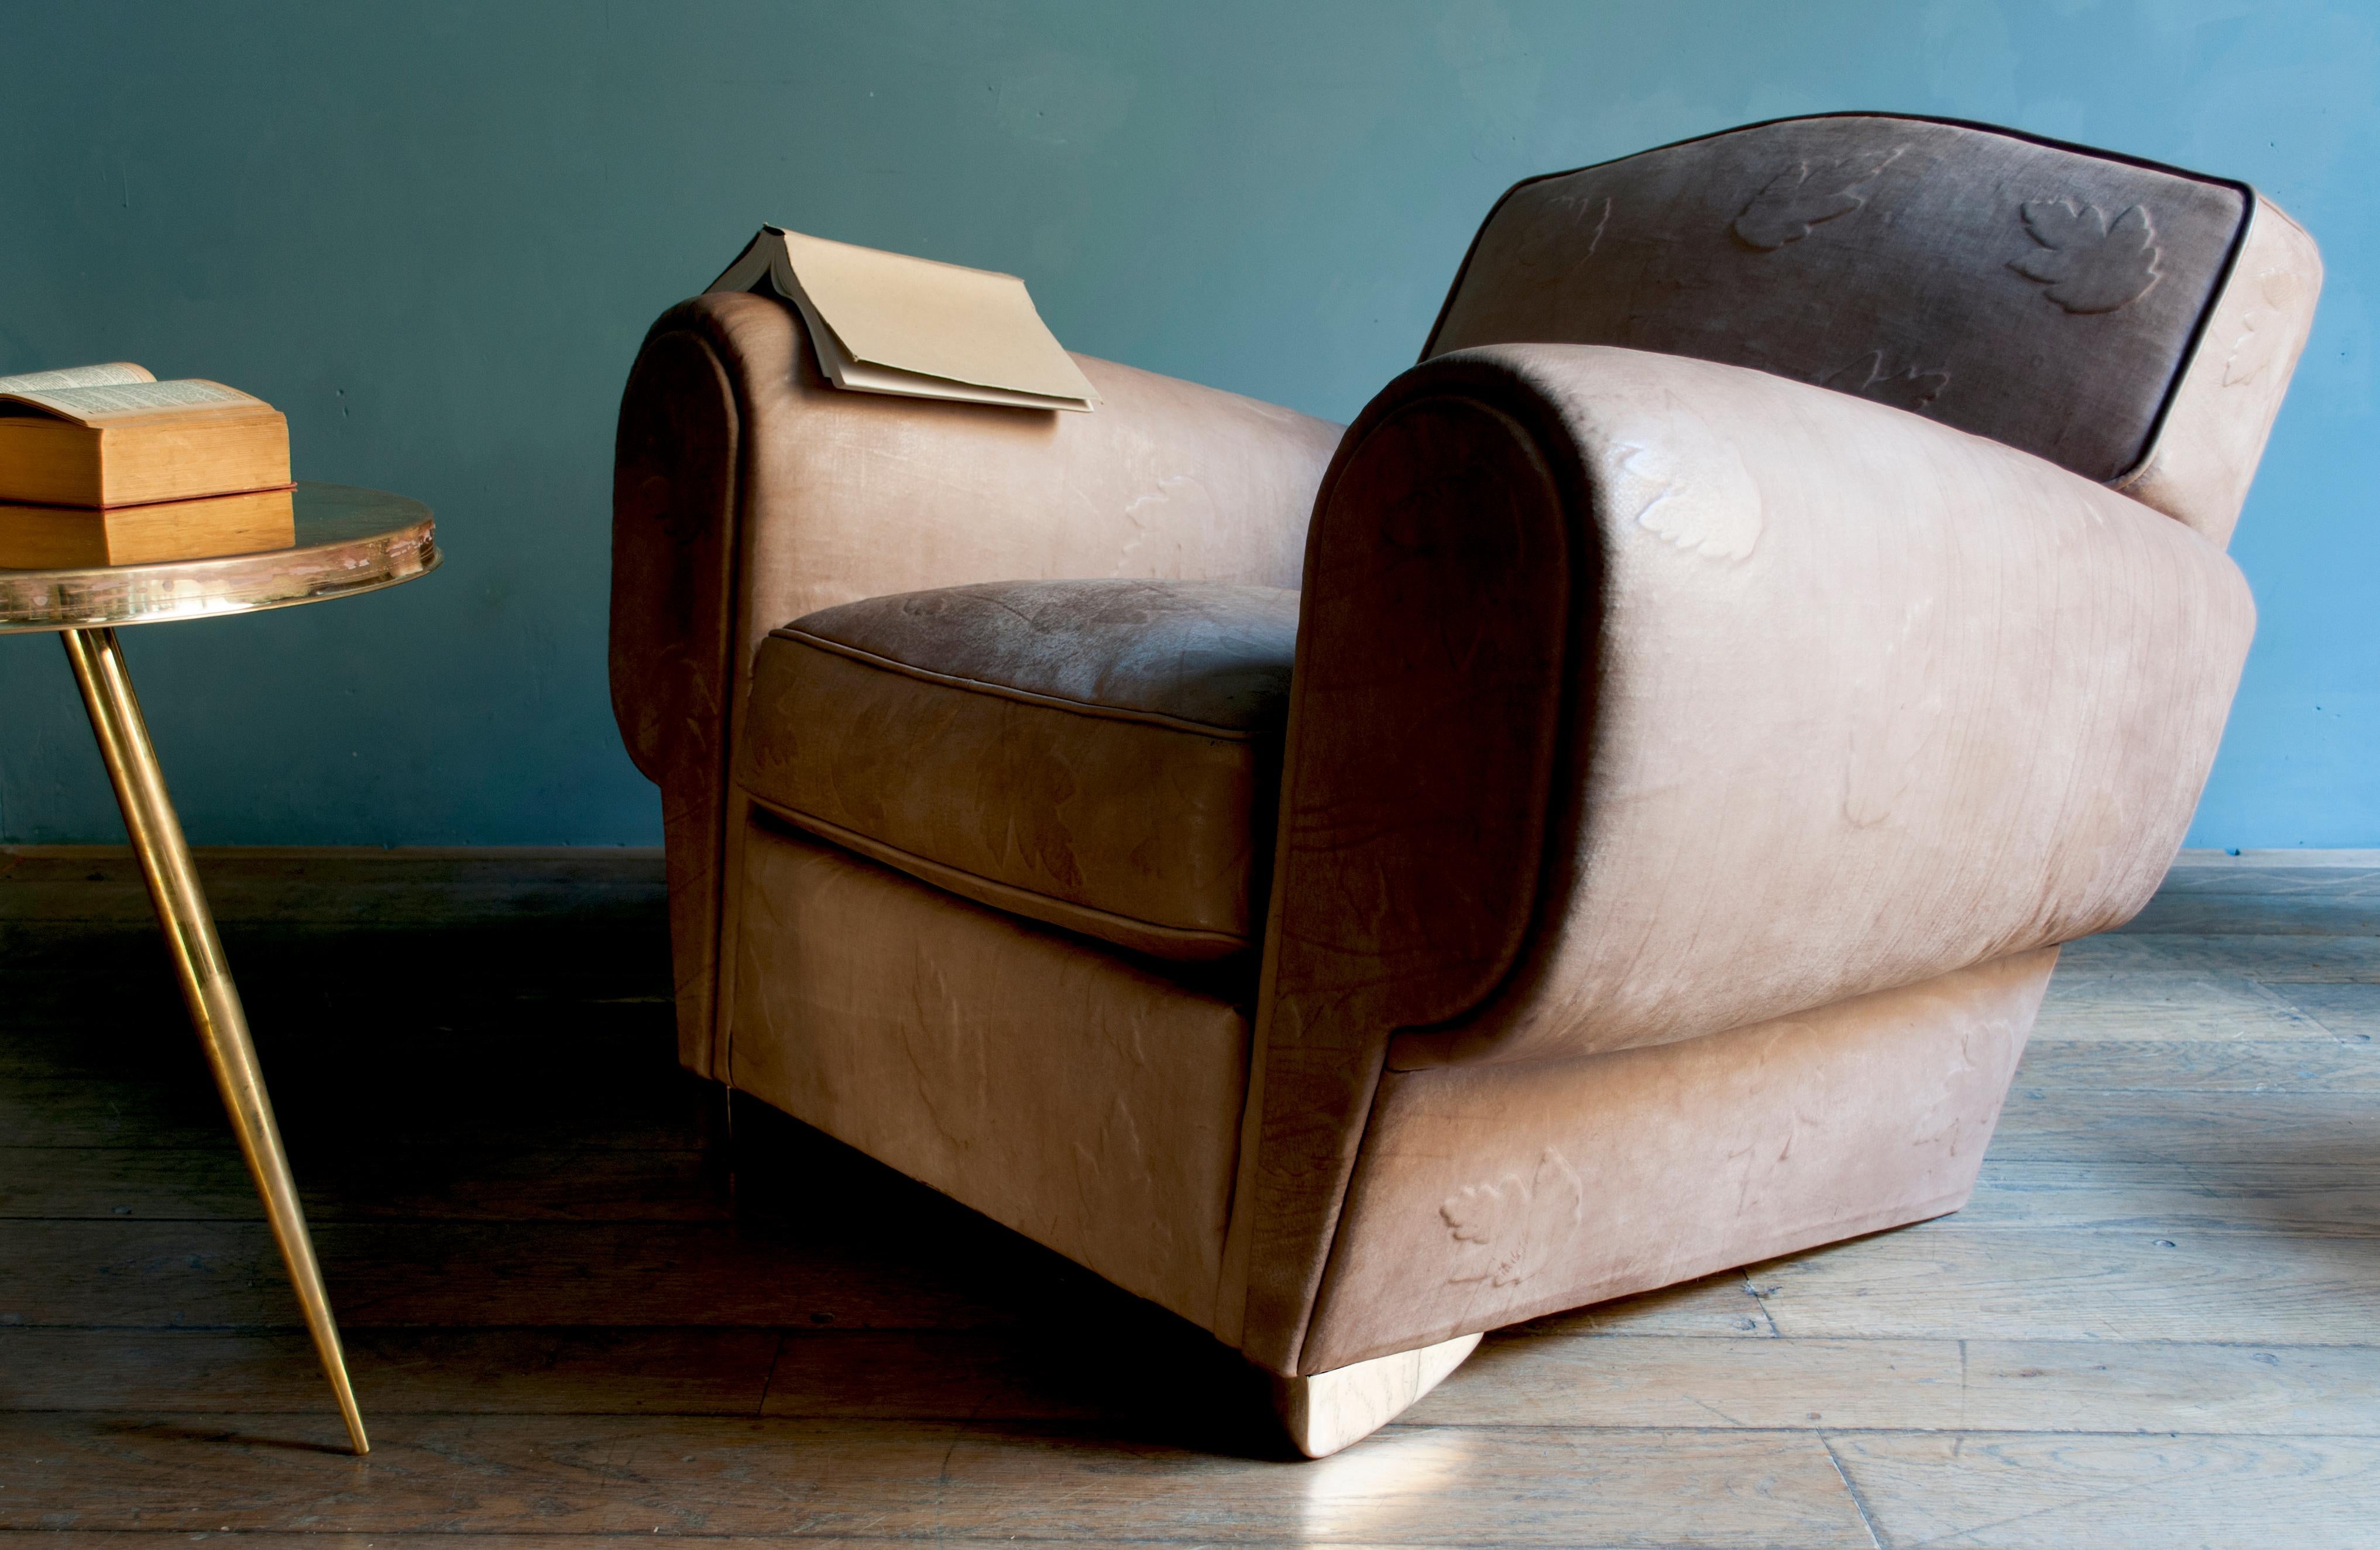 Simple yet bold, the profile and subtle hue of this armchair will provide both a sophisticated look and a natural charm to any decor. Its structure in solid beech is traditional but conceals a soul of steel springs made by hand. The goose feather